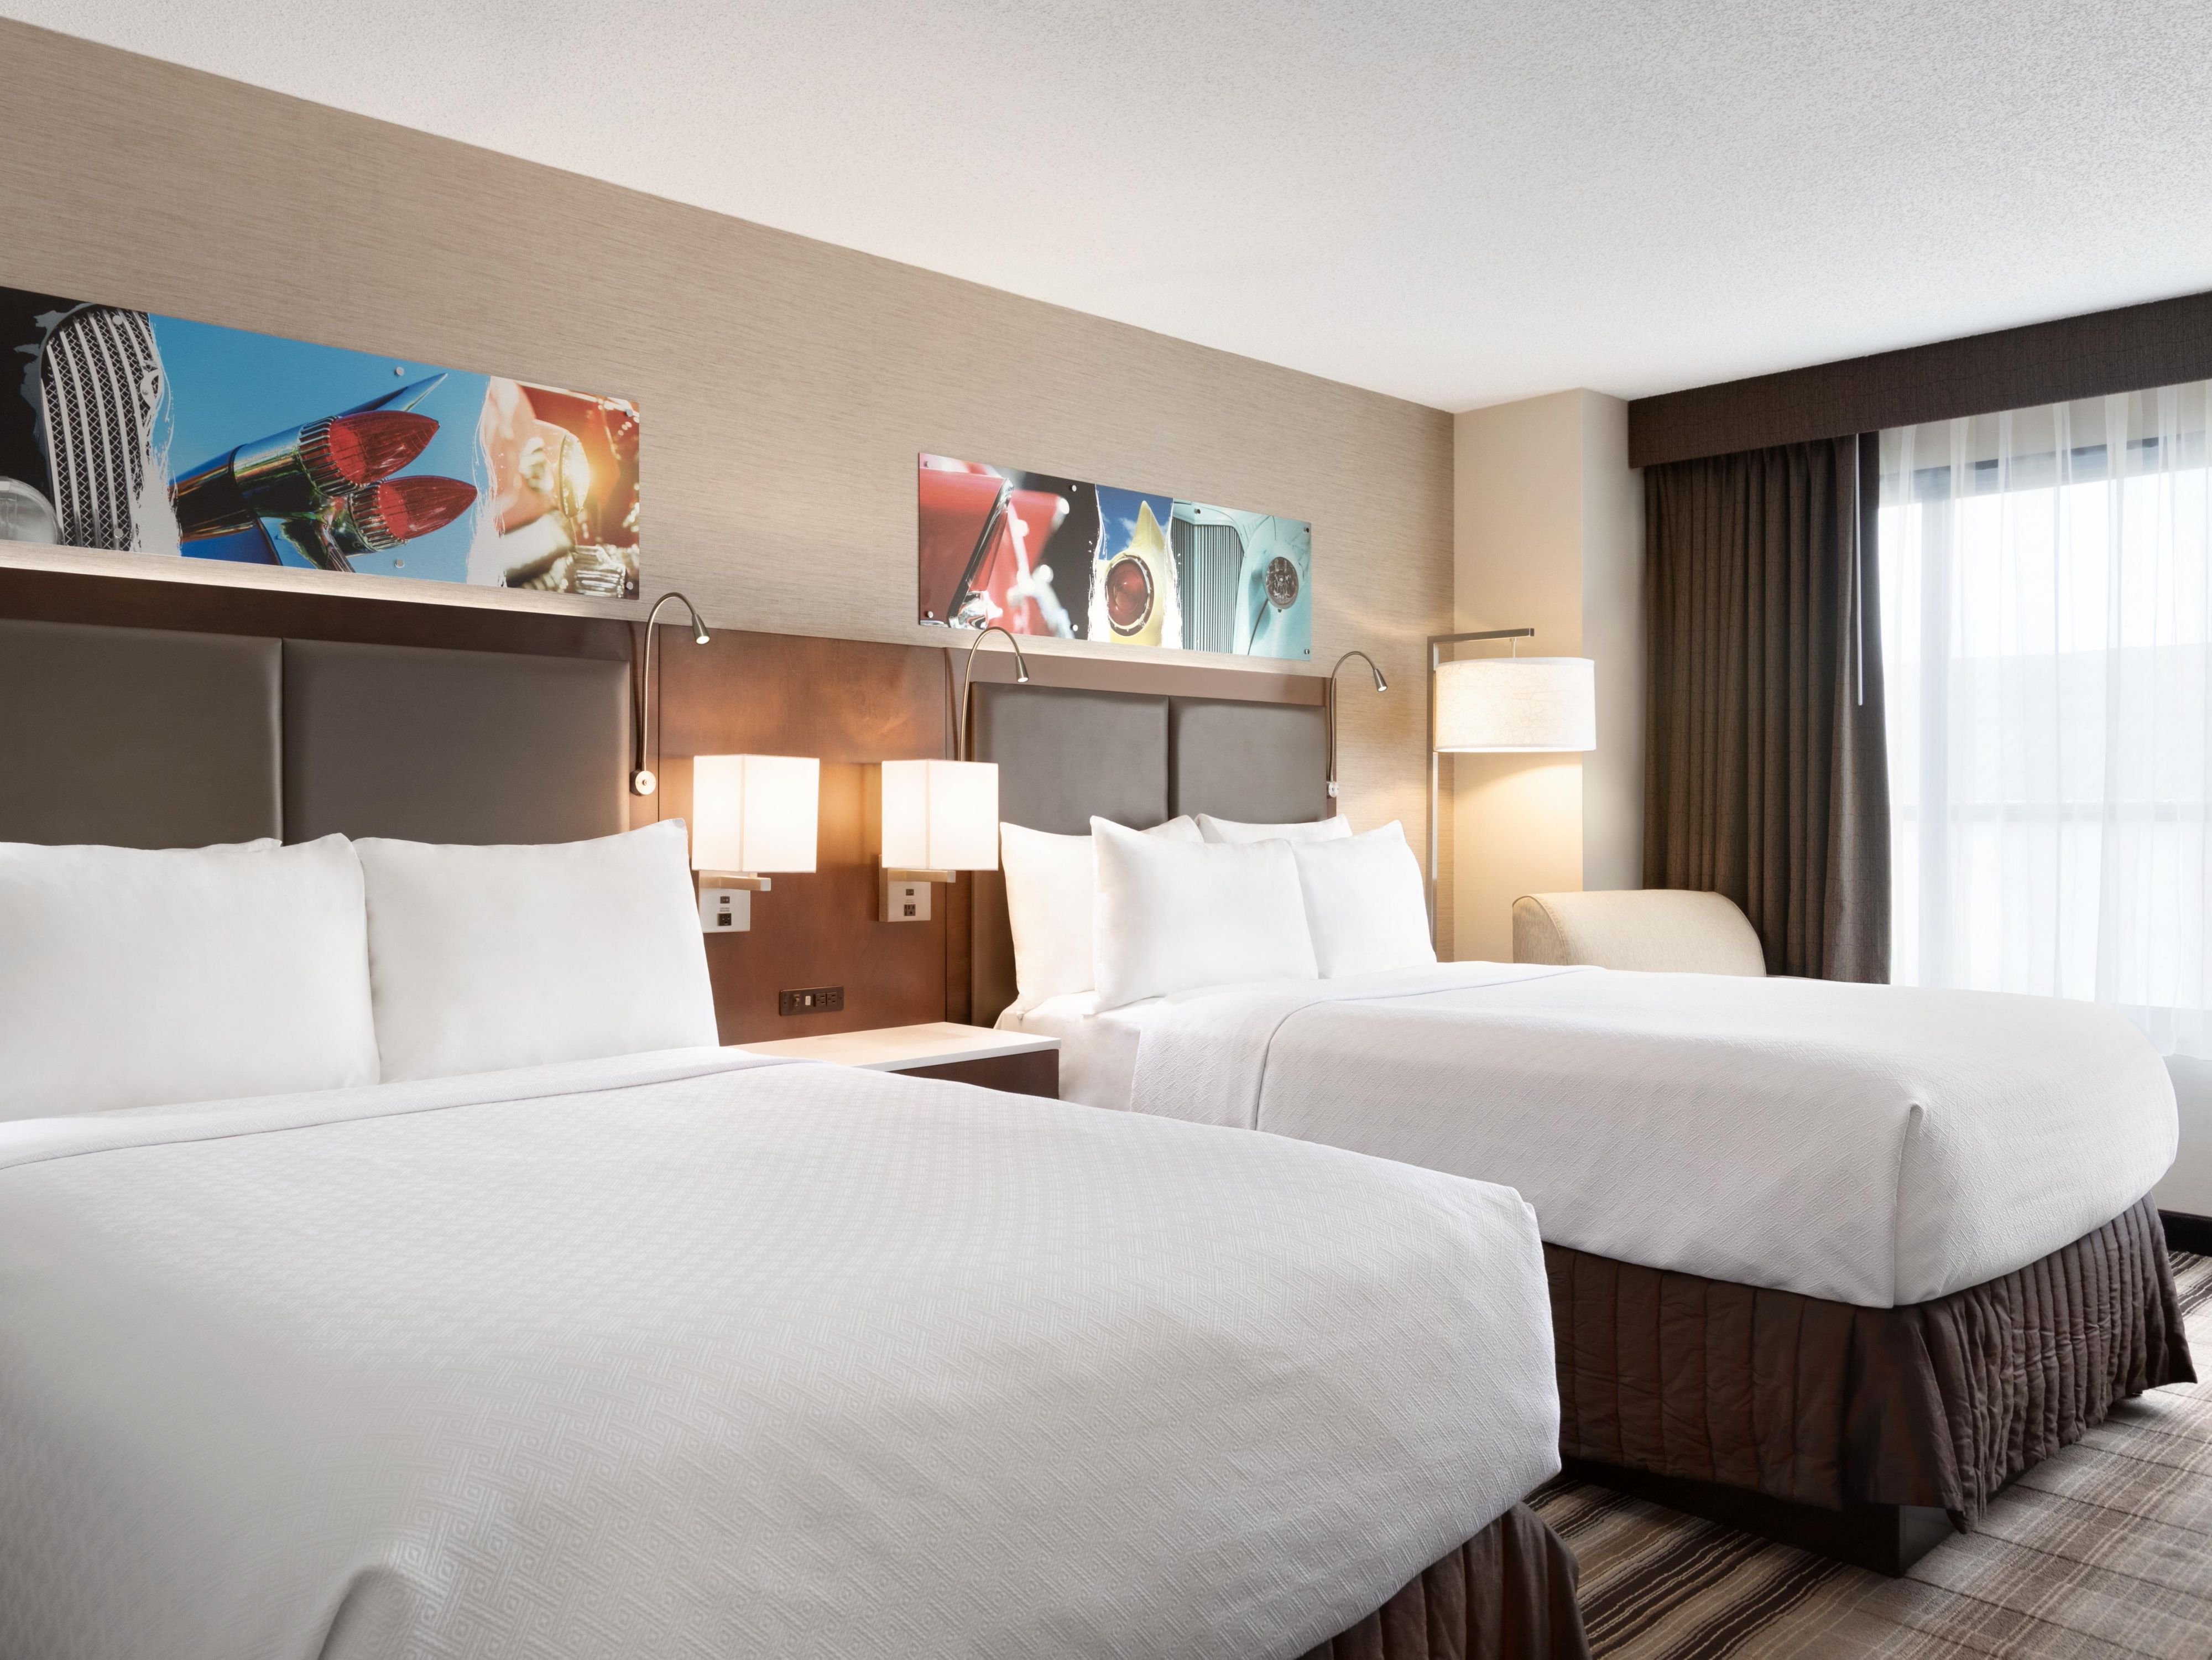 Accessible rooms feature convenient access to all room amenities.